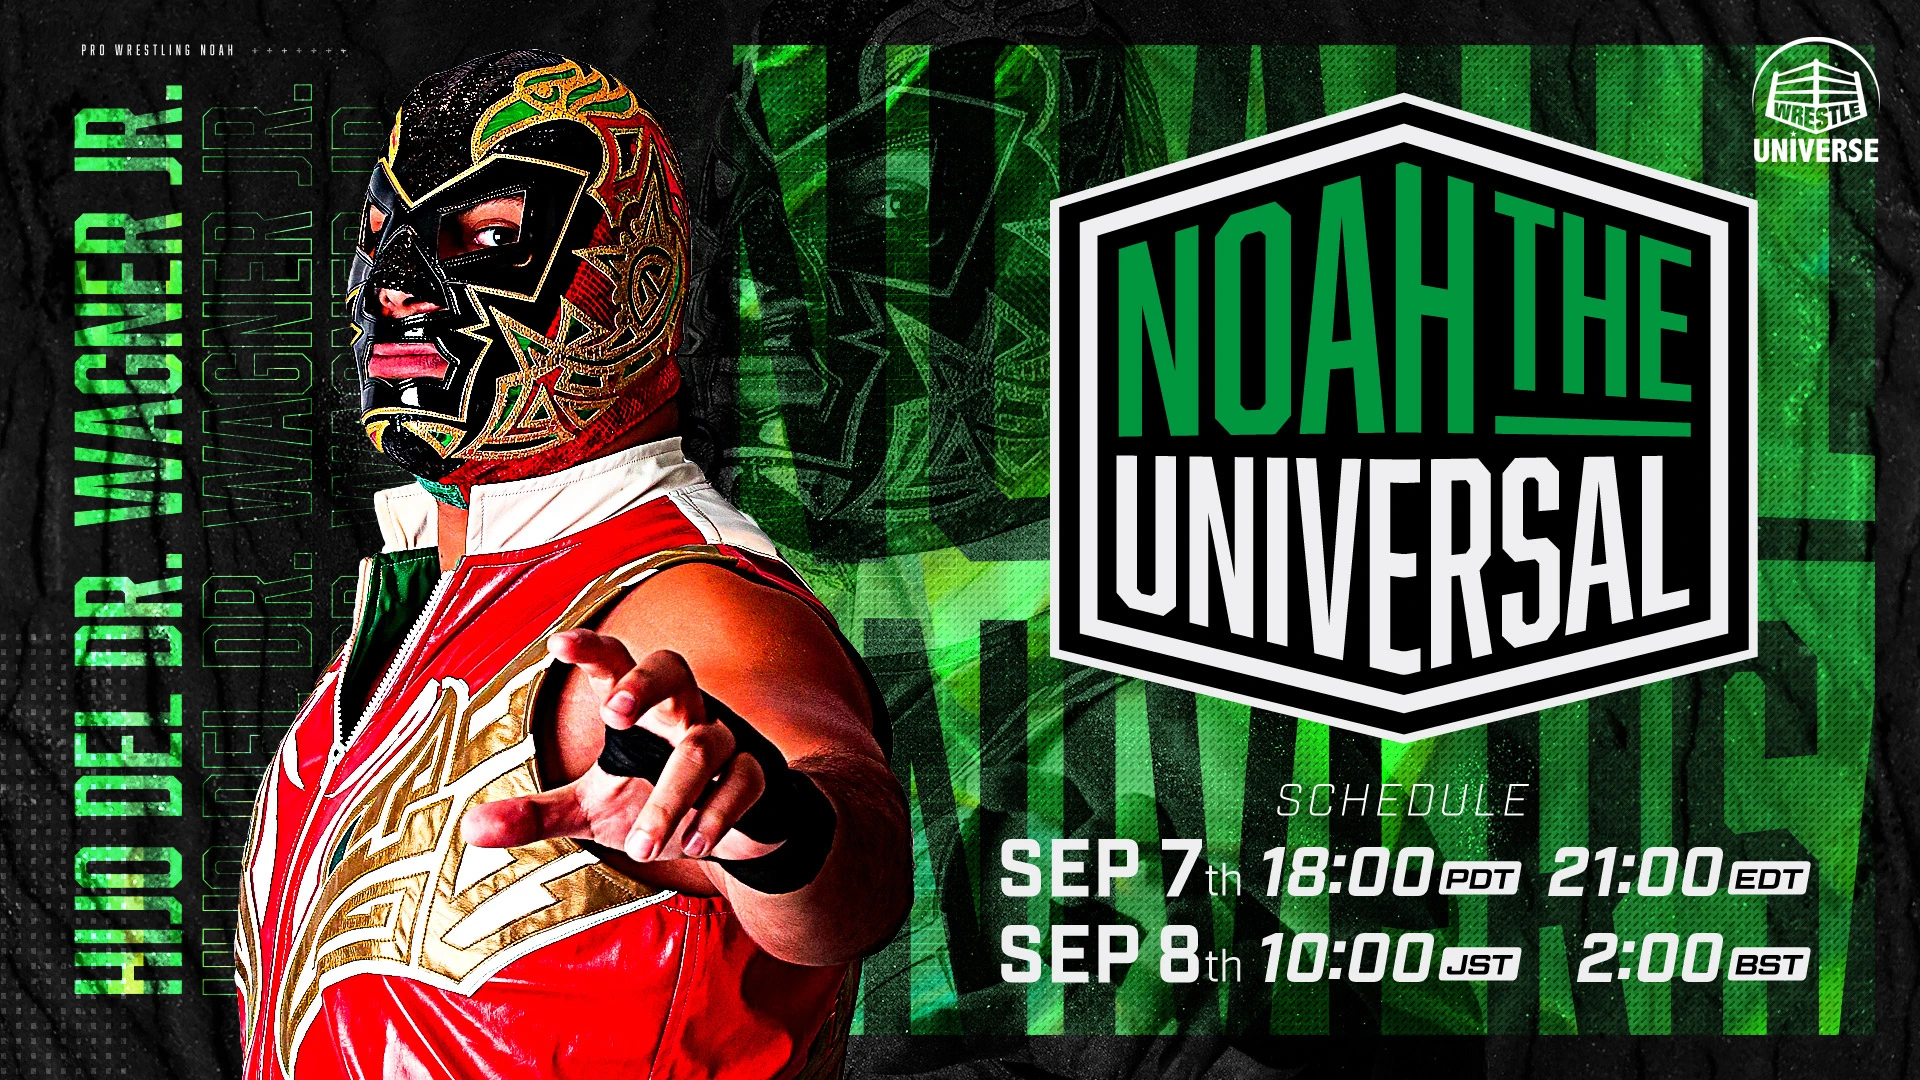 「NOAH the UNIVERSAL」 is a groundbreaking new series on Wrestle Universe specifically produced for international fans.